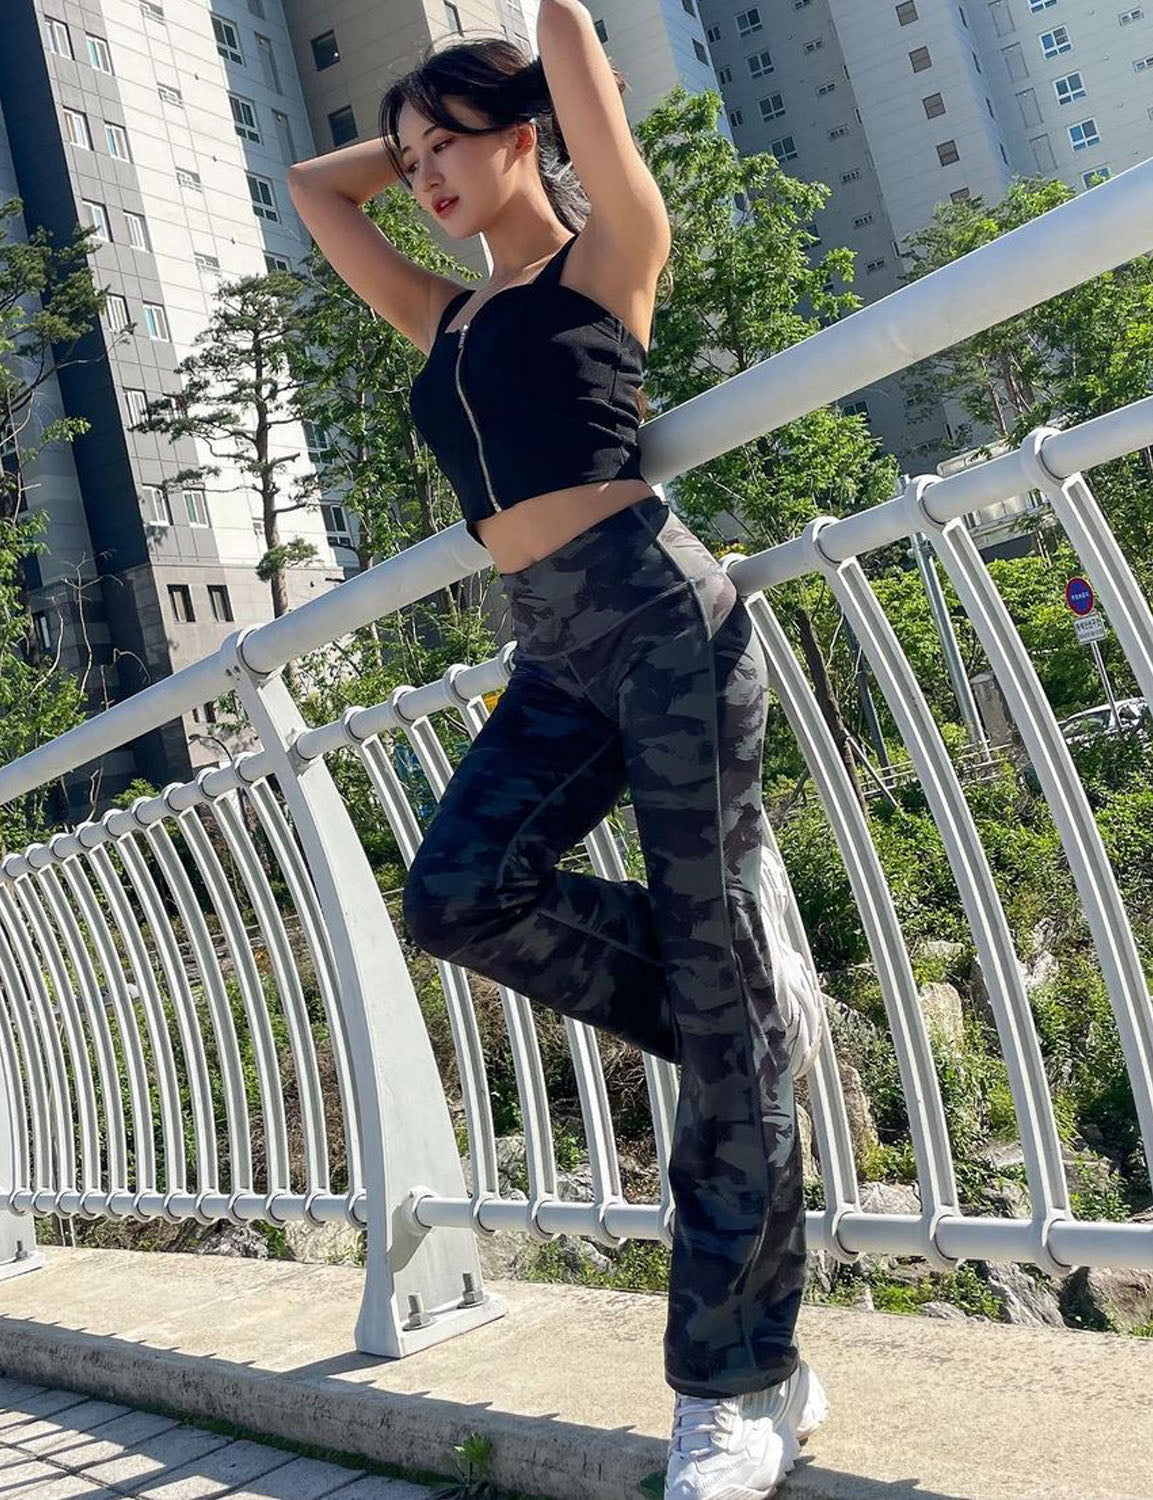 High Waist Printed Bootcut Leggings dimgray brushcamo 78%Polyester/22%Spandex Fabric doesn't attract lint easily 4-way stretch No see-through Moisture-wicking Tummy control Inner pocket Five lengths